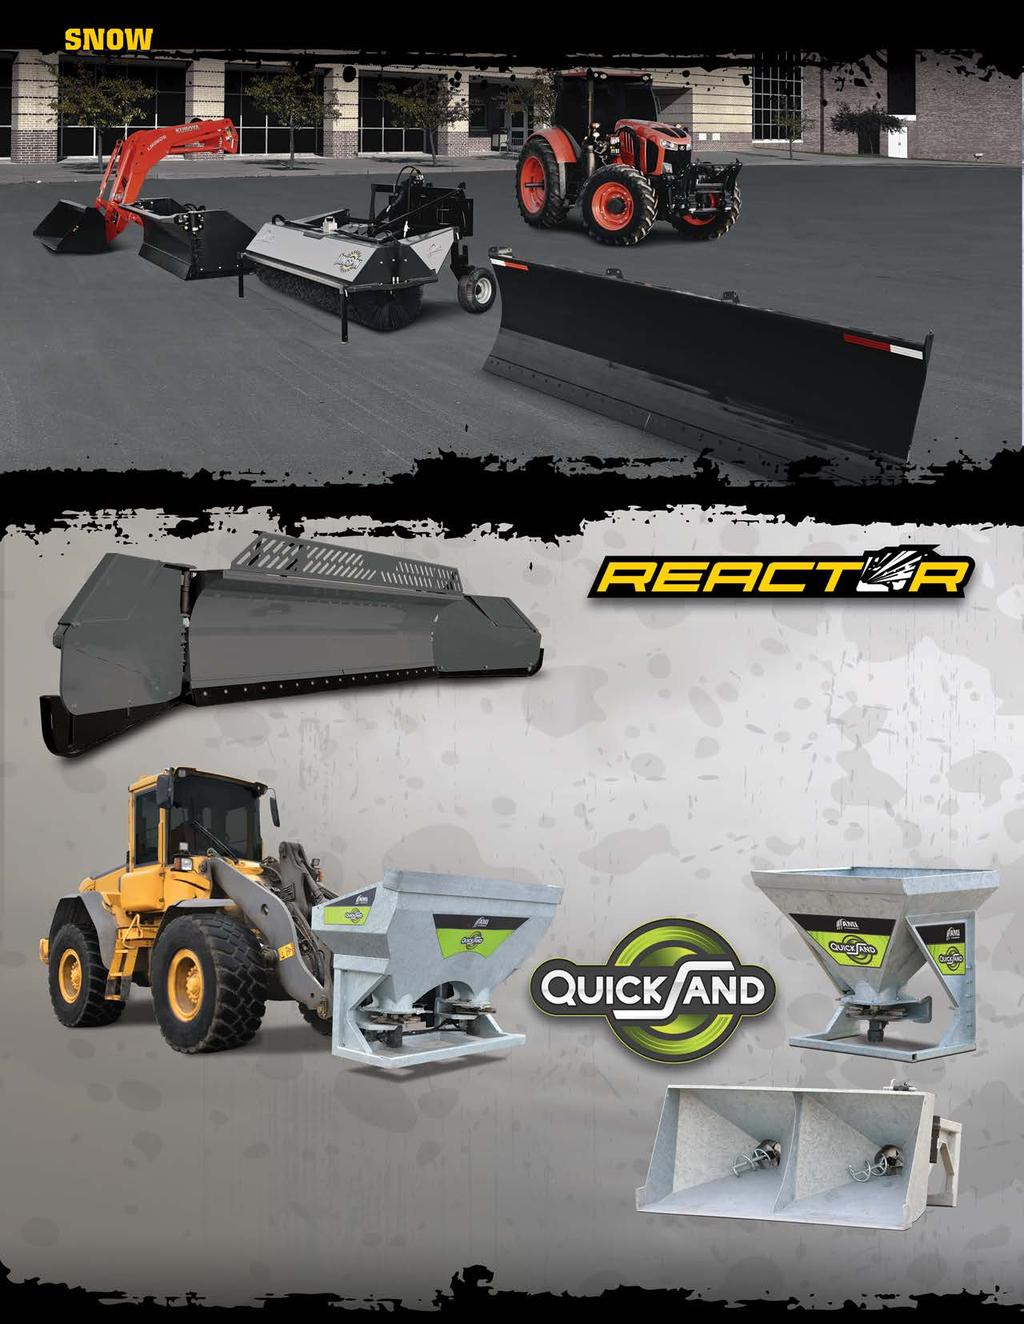 4-IN-1 REACTOR The big 4-in-1 Blade for wheel loaders and loader backhoes is a system of four blade positions that give you the tools to clear large areas of snow fast.